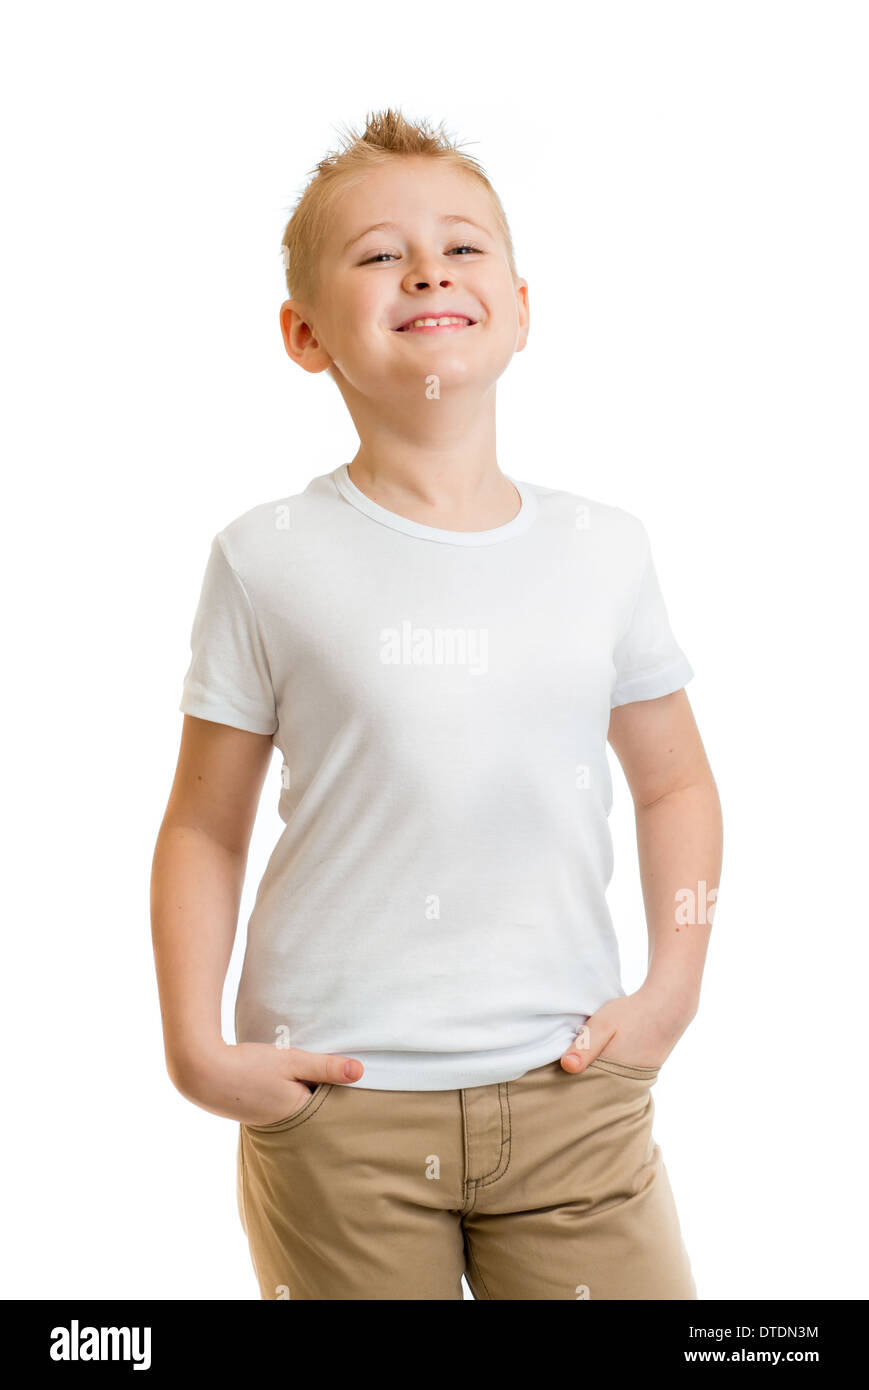 model boy in white t-shirt or tshirt isolated Stock Photo